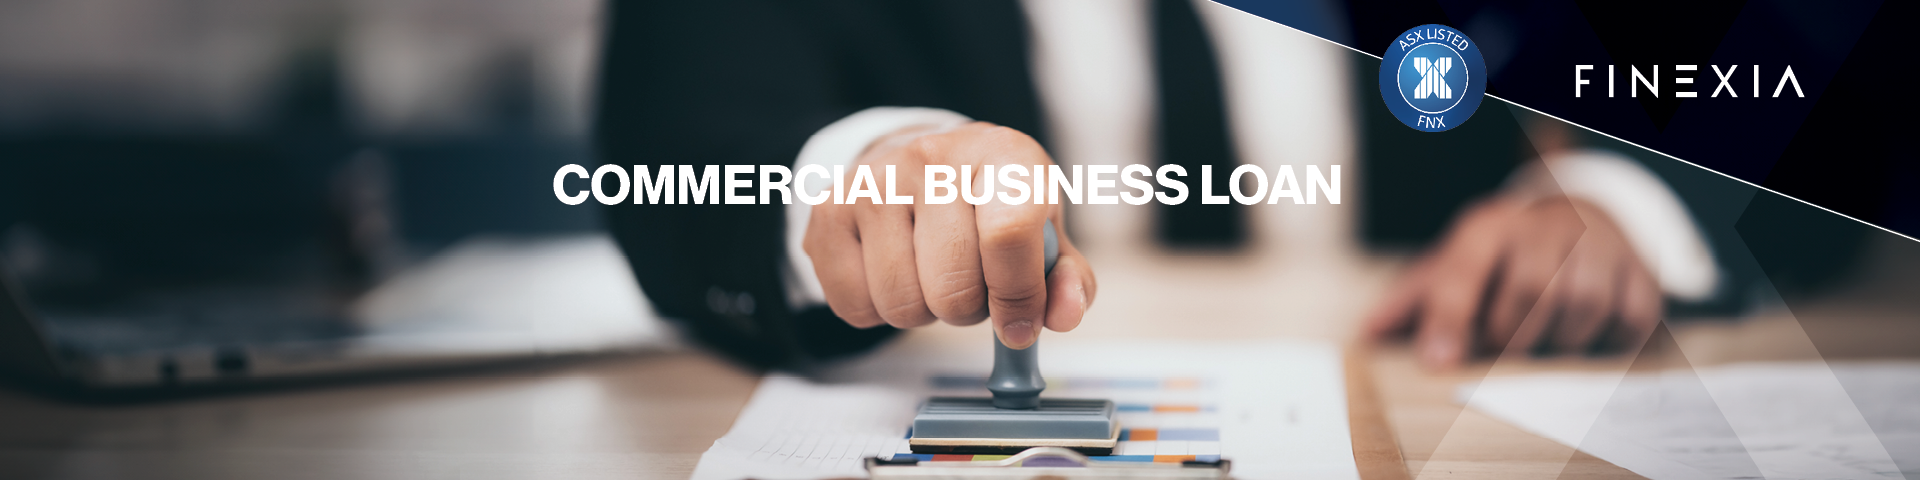 7 Reasons Why a Commercial Business Loan Can Boost Your Business